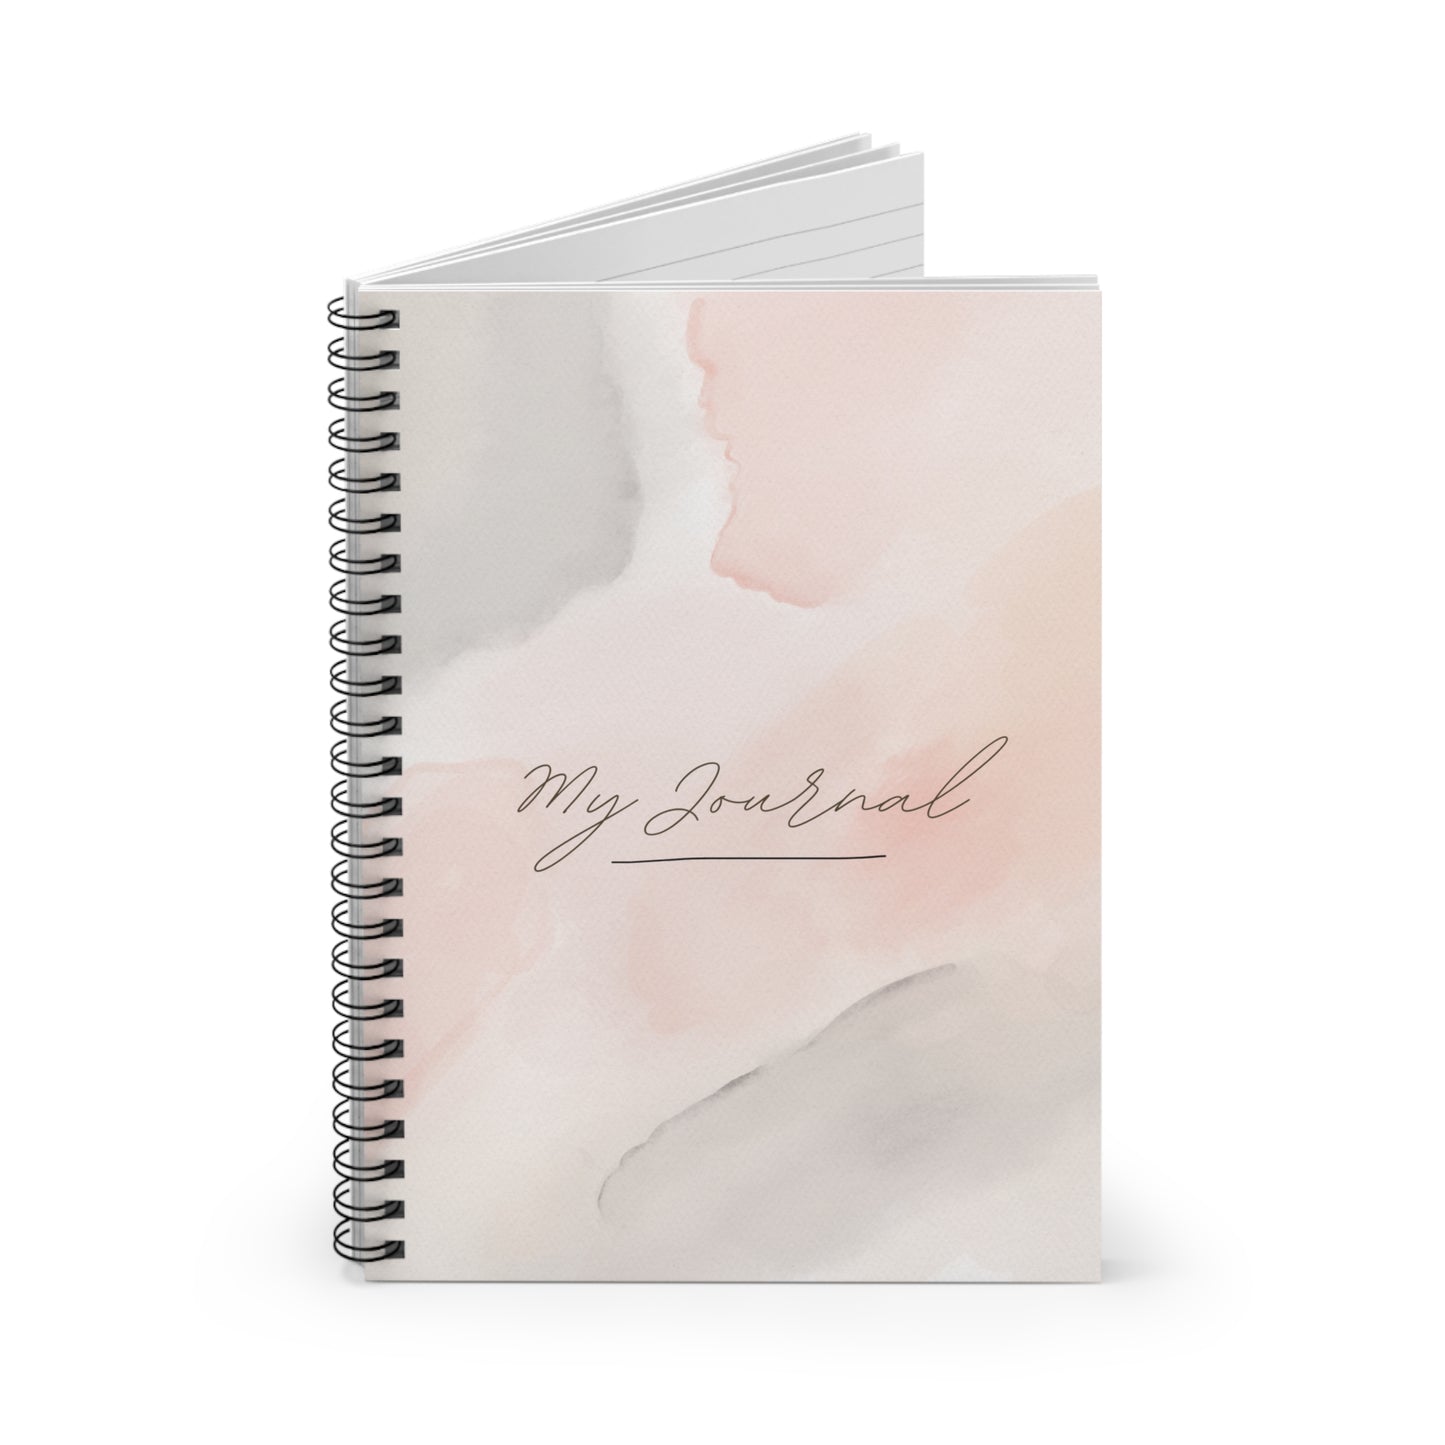 Pink and Gray Aesthetic Spiral Bound Notebook for Journaling, 15 Min Gratitude Journal, Gifts for Her, Gifts for Grief and Loss, Prayer Book